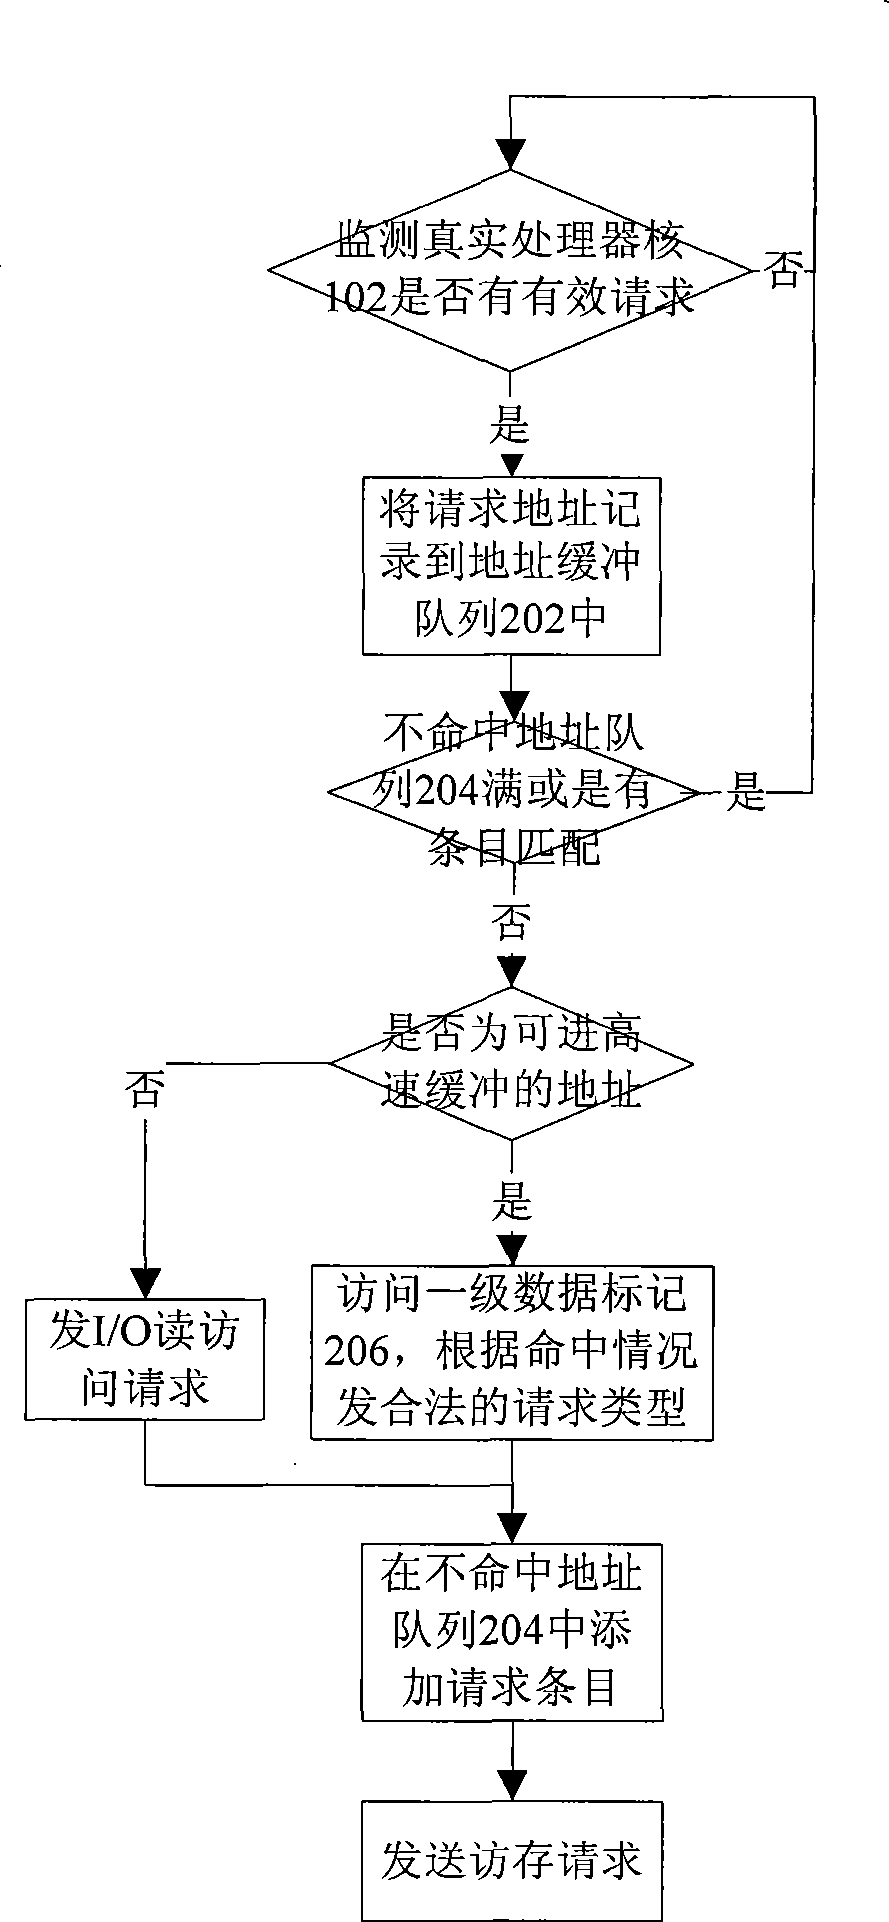 Consistency physical verification device of multicore processor Cache